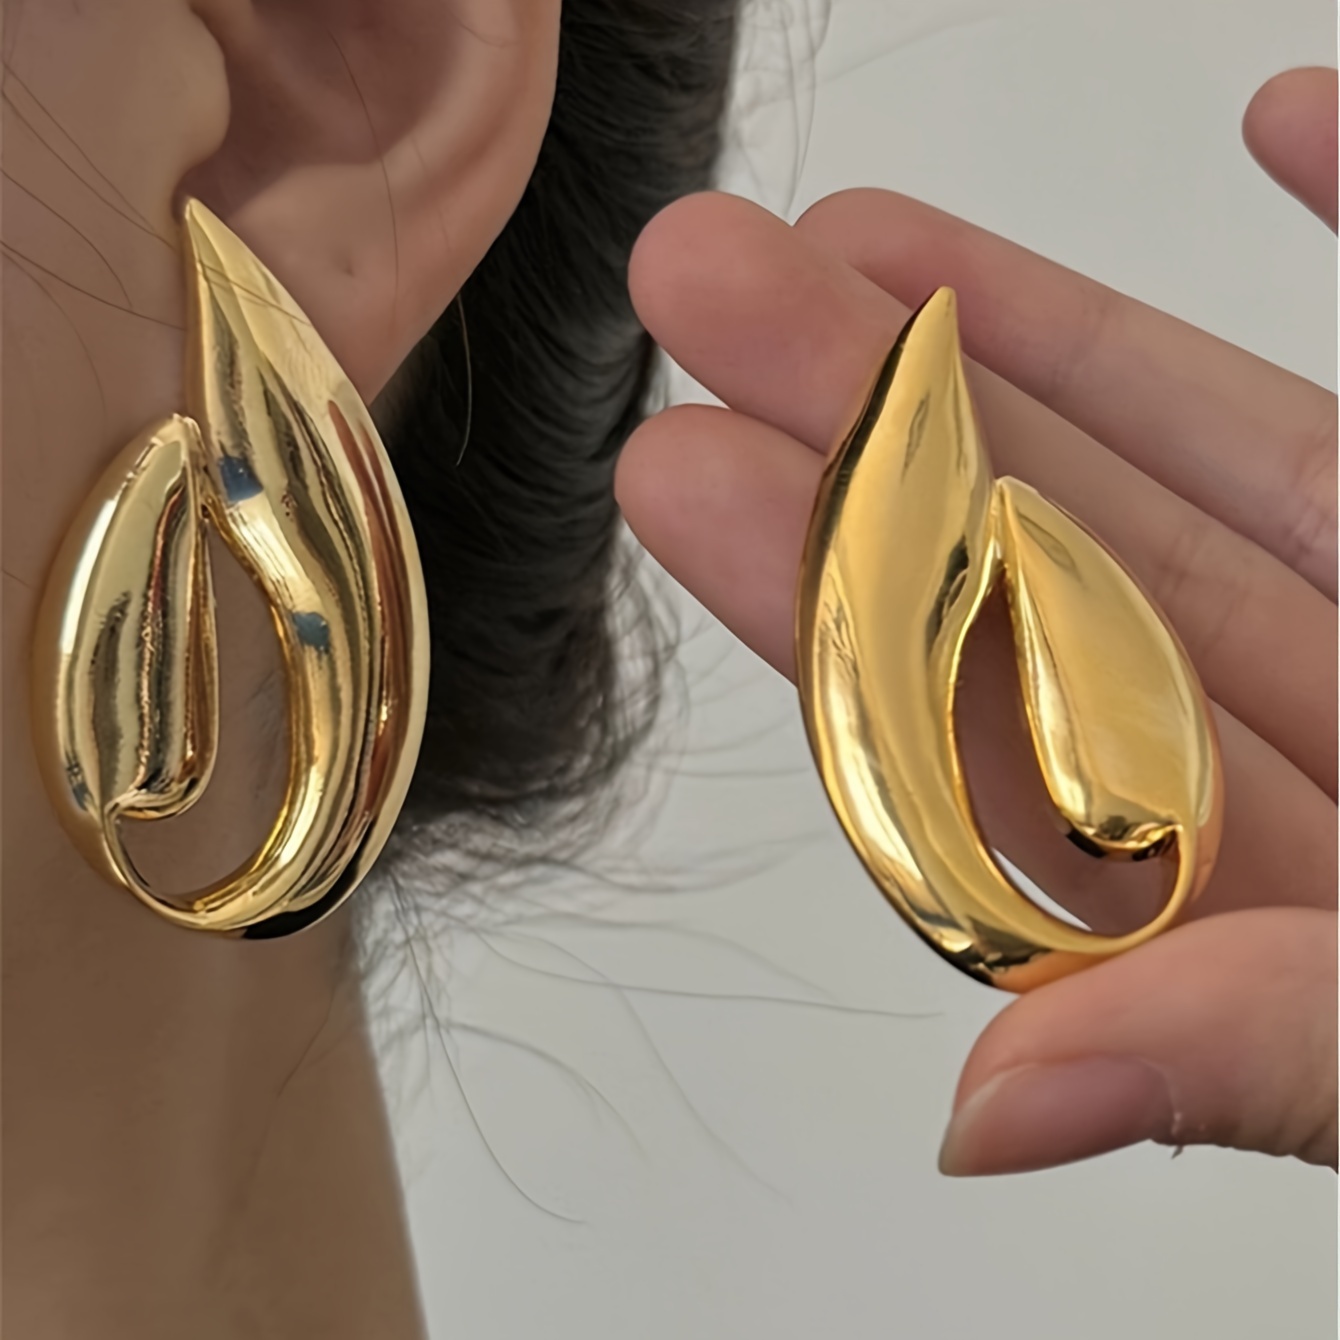 

A Pair Of Asymmetrical Geometric Earrings Golden Color Ear Piercing Jewelry Statement Accessories For Women